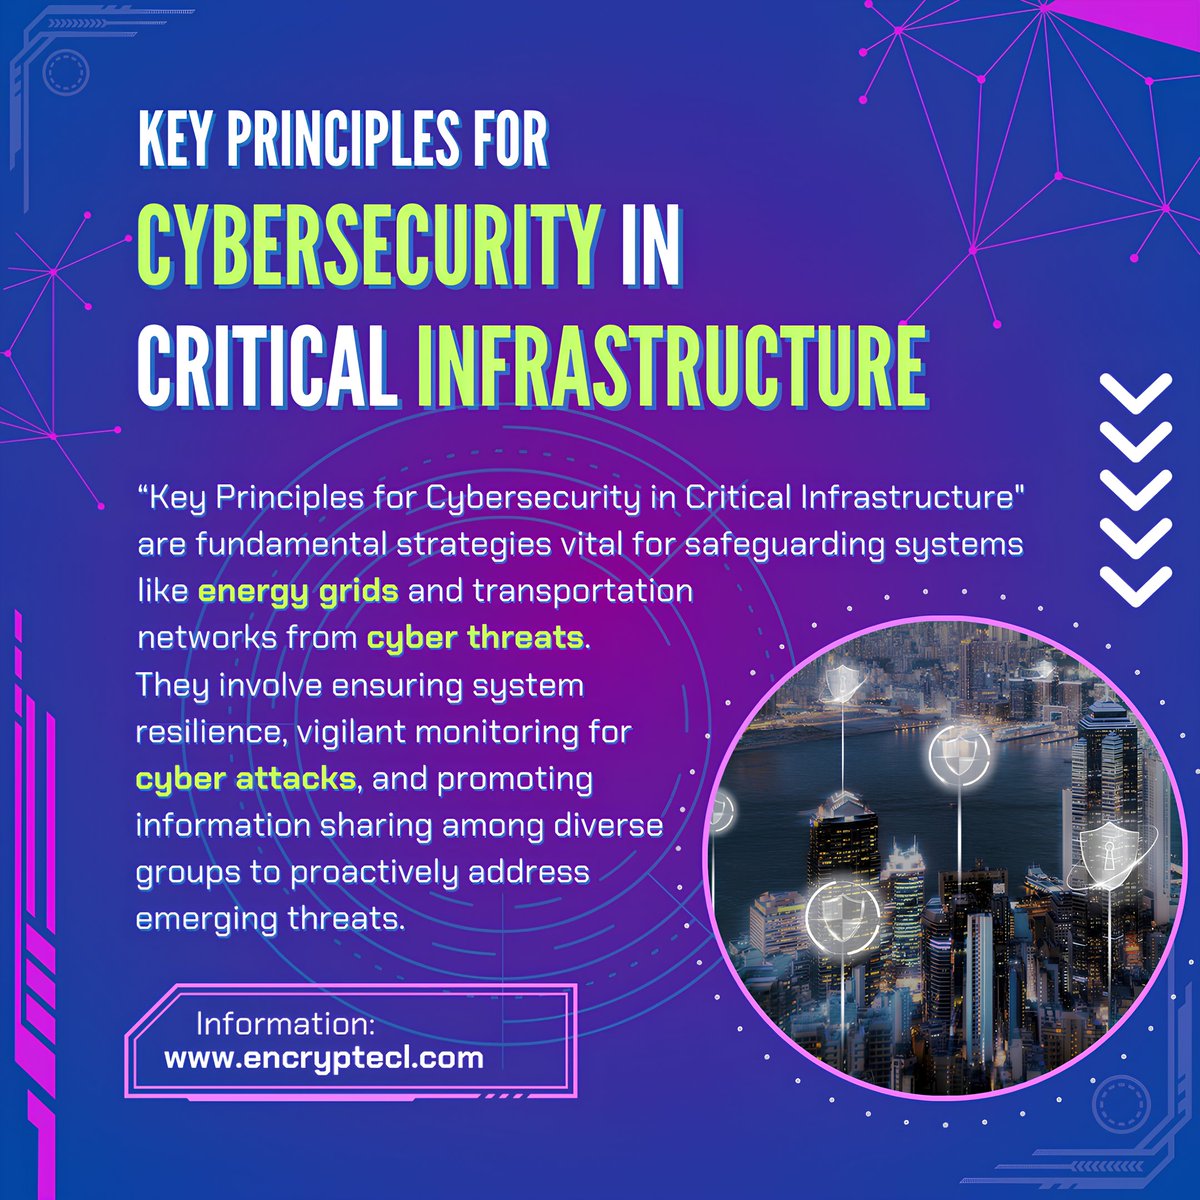 Protecting essential systems like energy grids and transportation networks from cyber threats is crucial. 🔒🛡️ Learn about the key principles for cybersecurity in critical infrastructure: resilience, monitoring, and information sharing.  💻 #Cybersecurity #CriticalInfrastructure